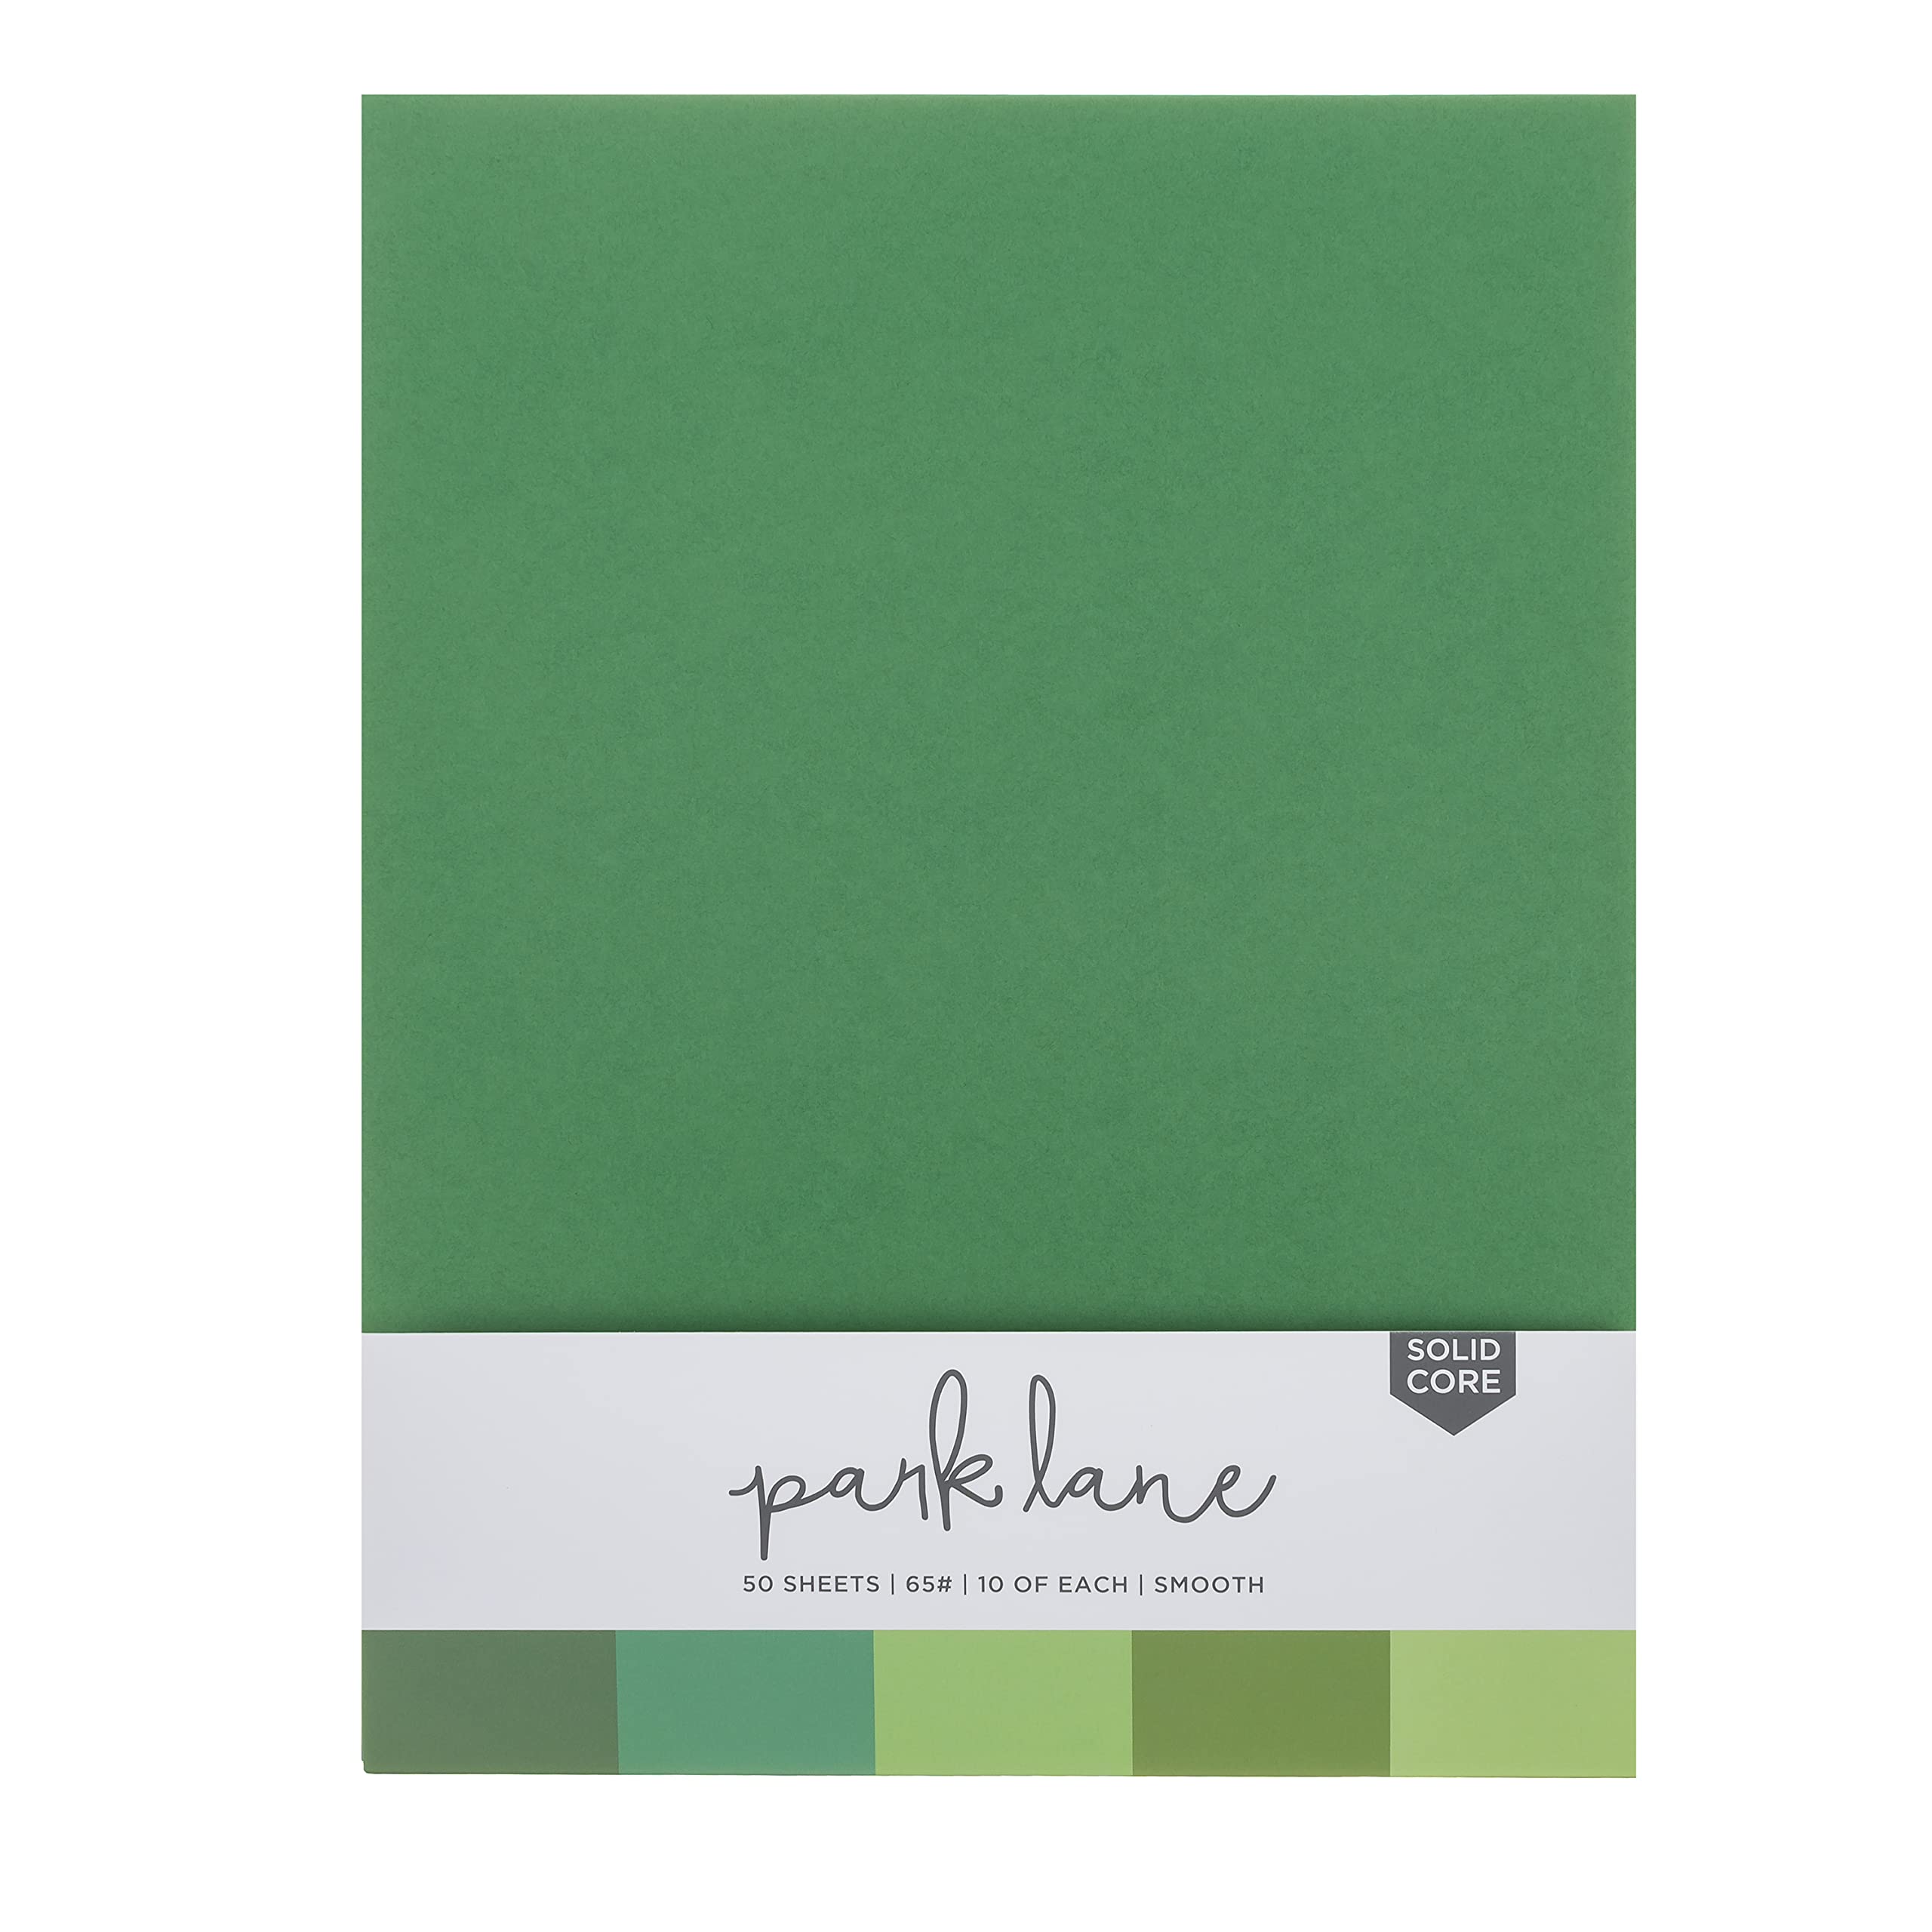 Cardstock 8.5 x 11 Paper Pack - Assorted Colored Scrapbook Paper 65lb -  Double Sided Card Stock for Crafts Embossing Cardmaking - 50 Sheets Solid  Core Greens